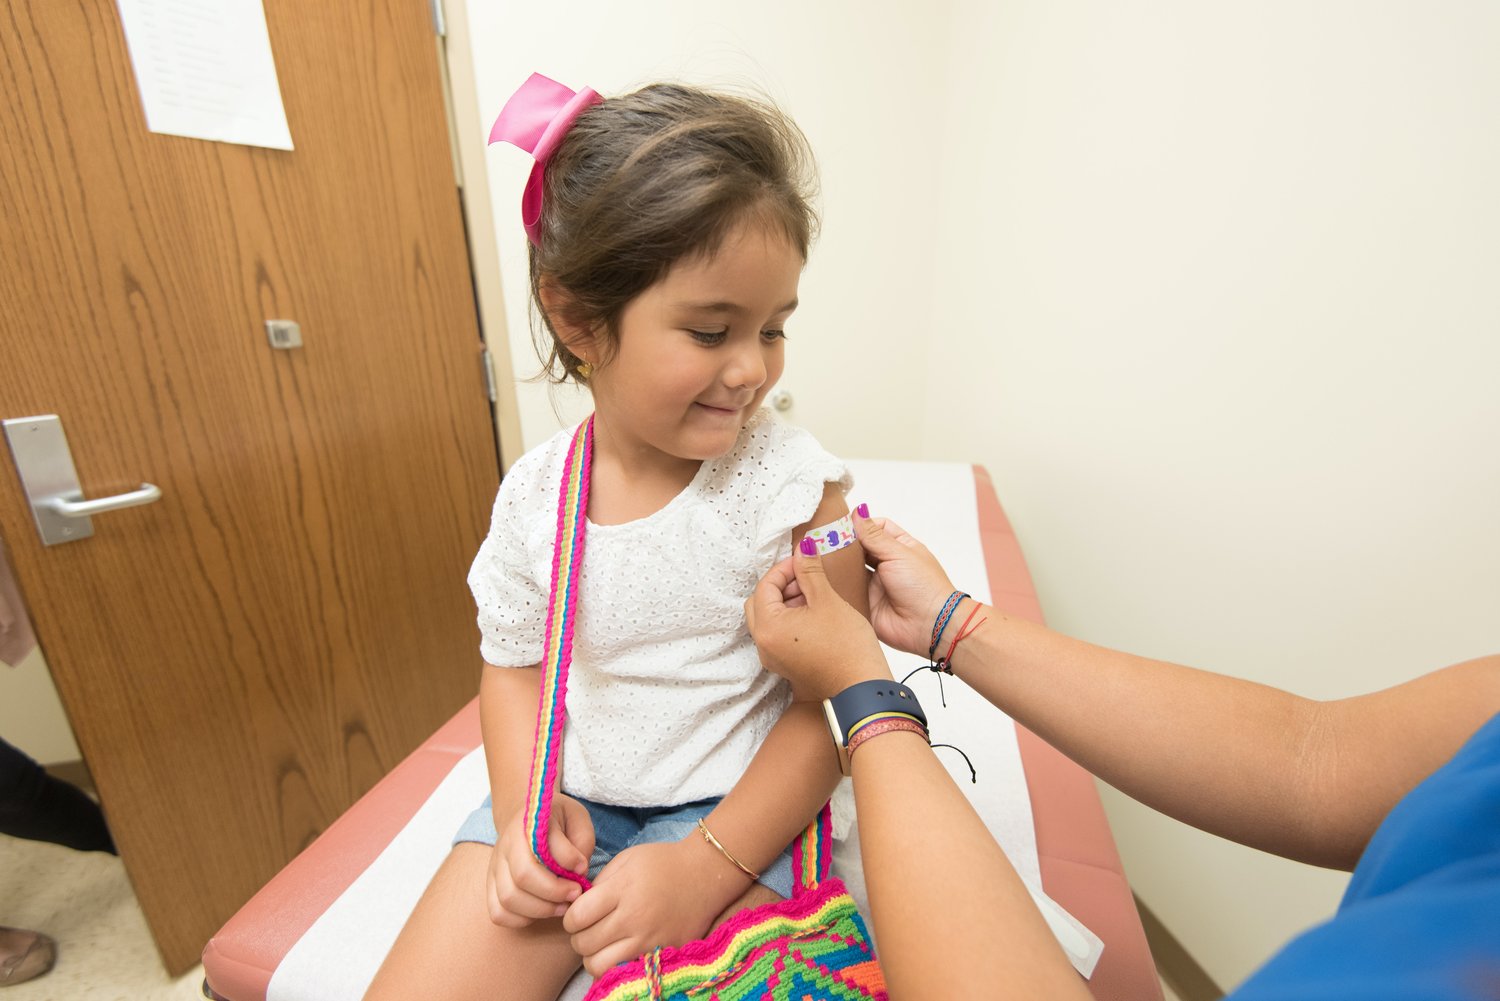 The Pfizer COVID-19 vaccine was recently approved for use on children ages 5 to 11.